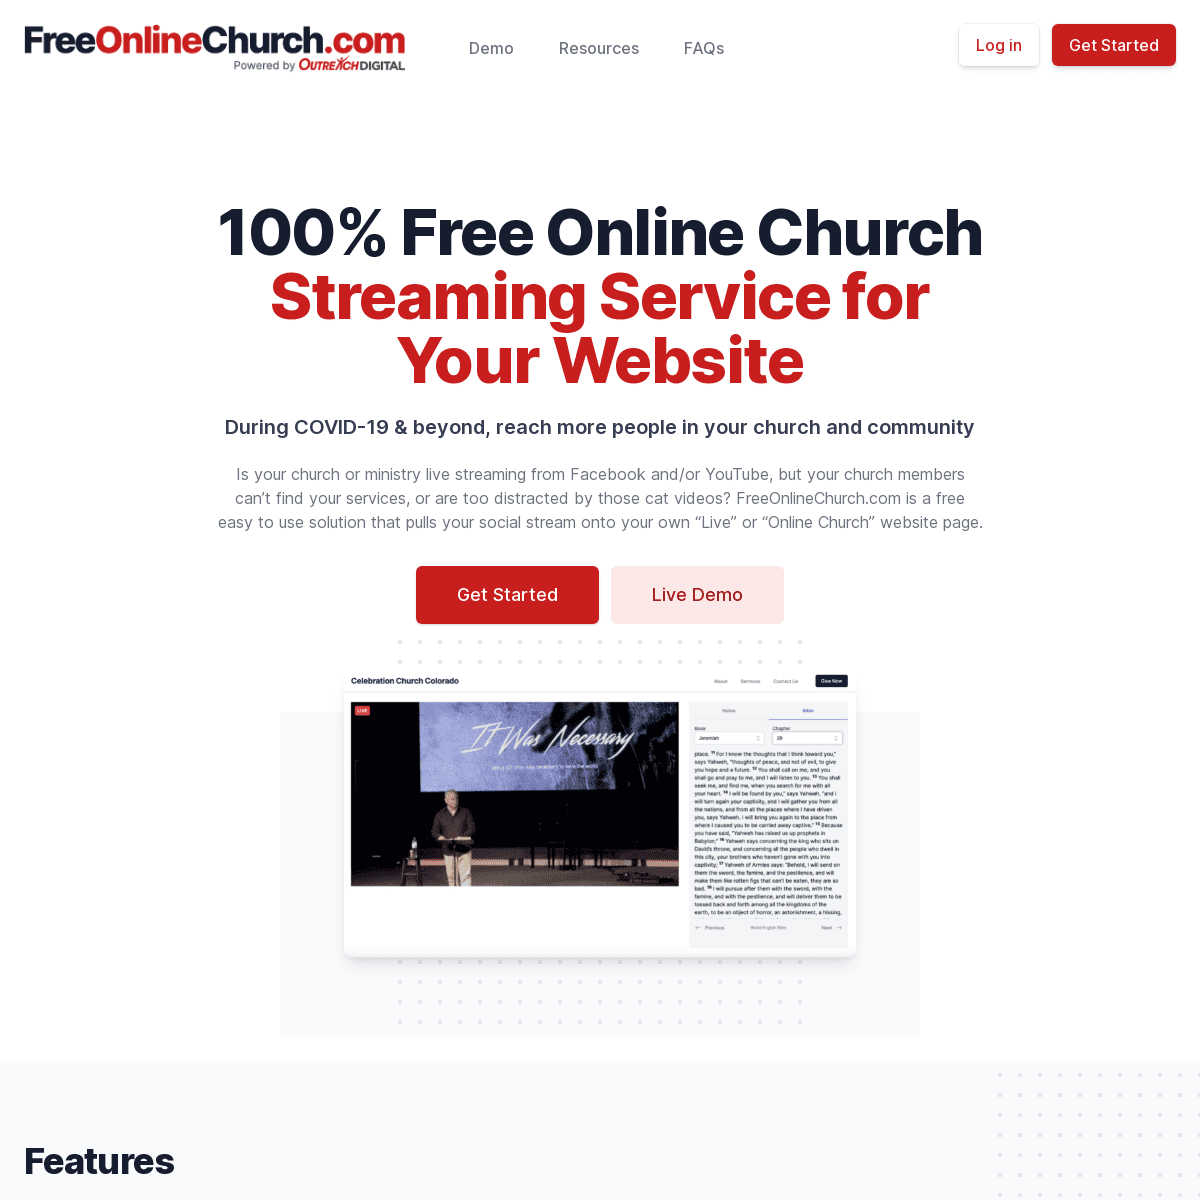 A complete backup of https://freeonlinechurch.com